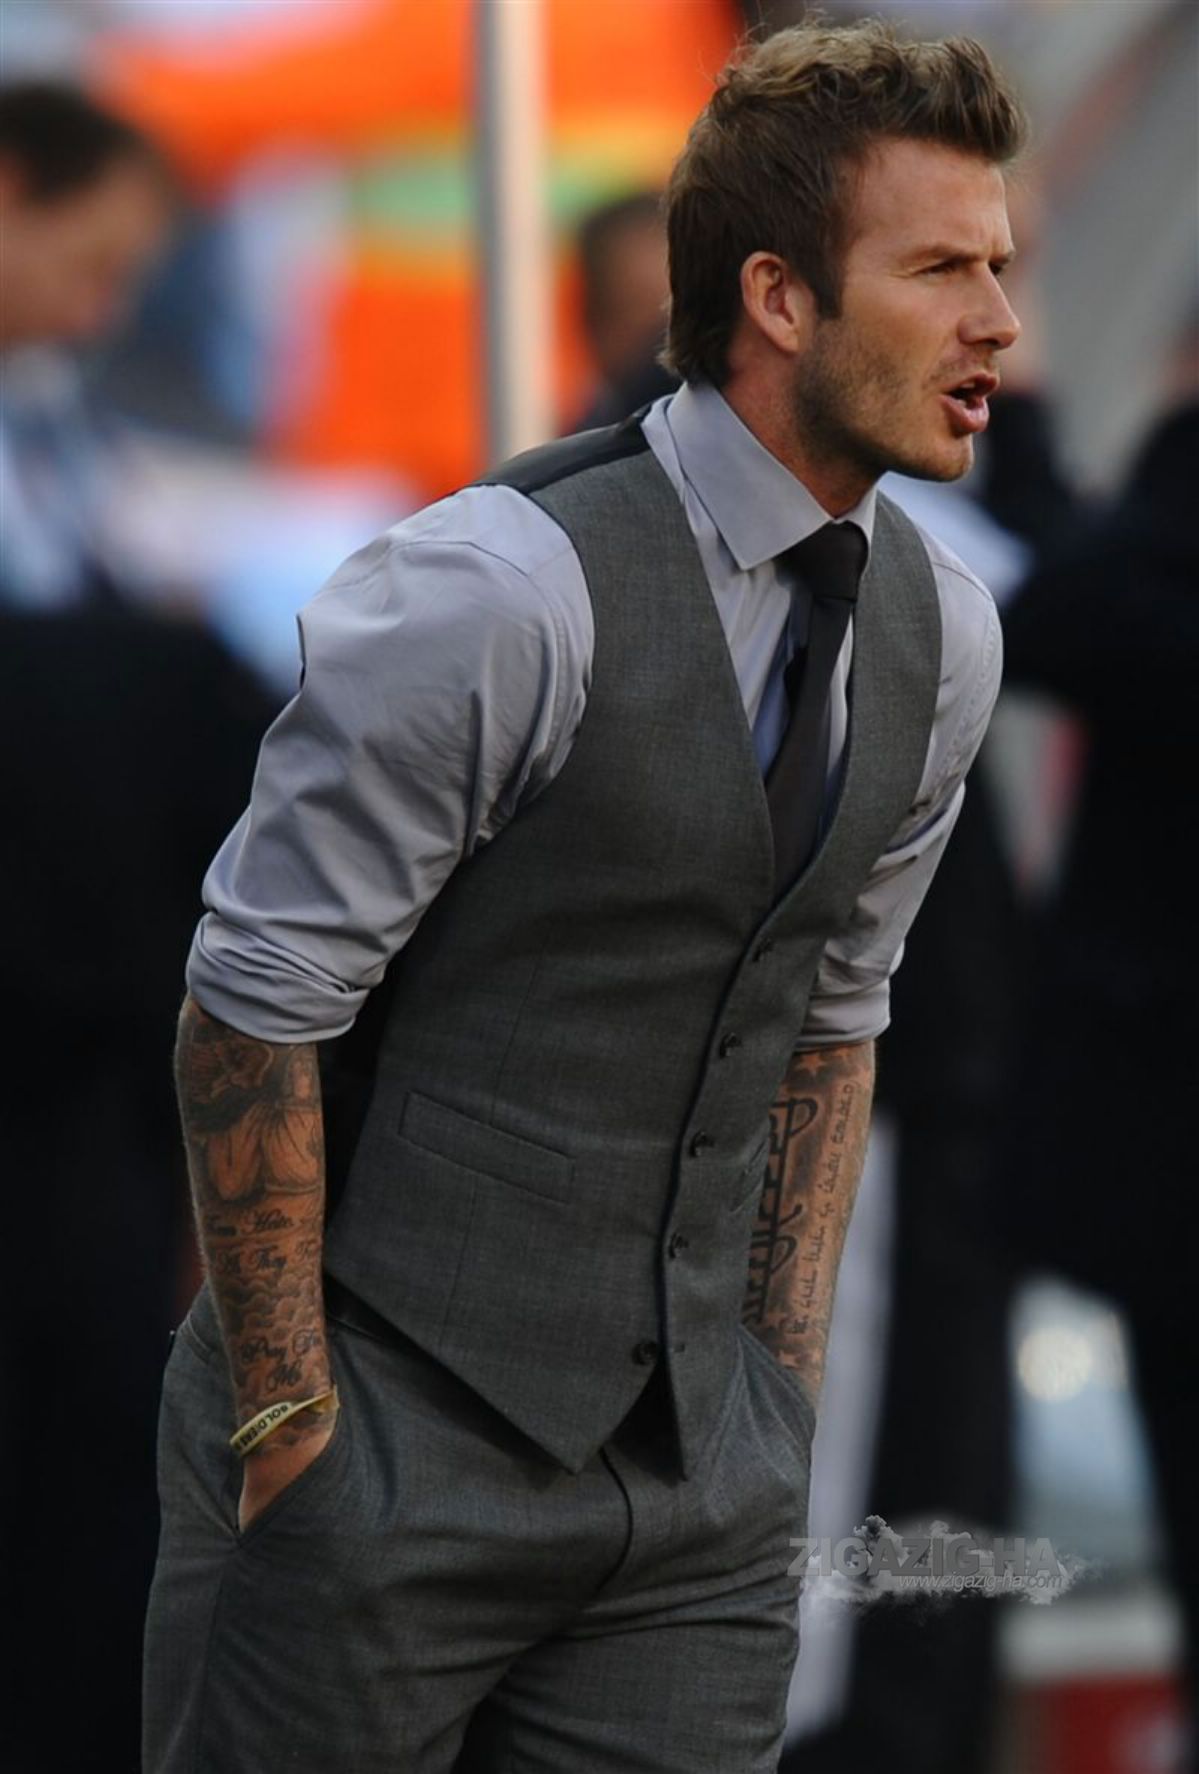 Opt for a charcoal or gray suit over black